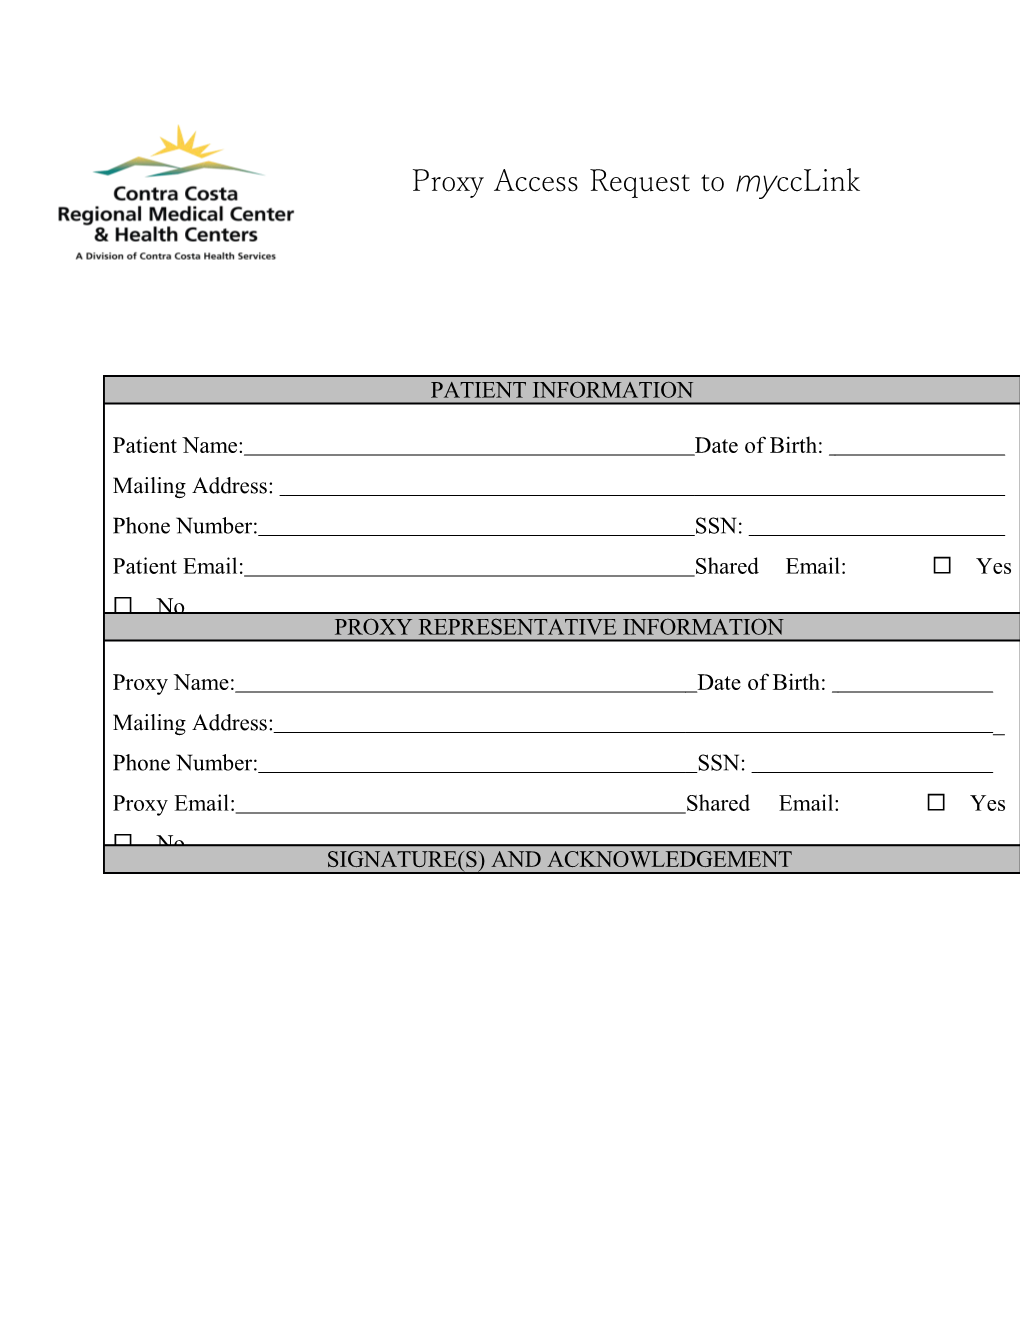 Proxy Access Request Eng 4.22.16